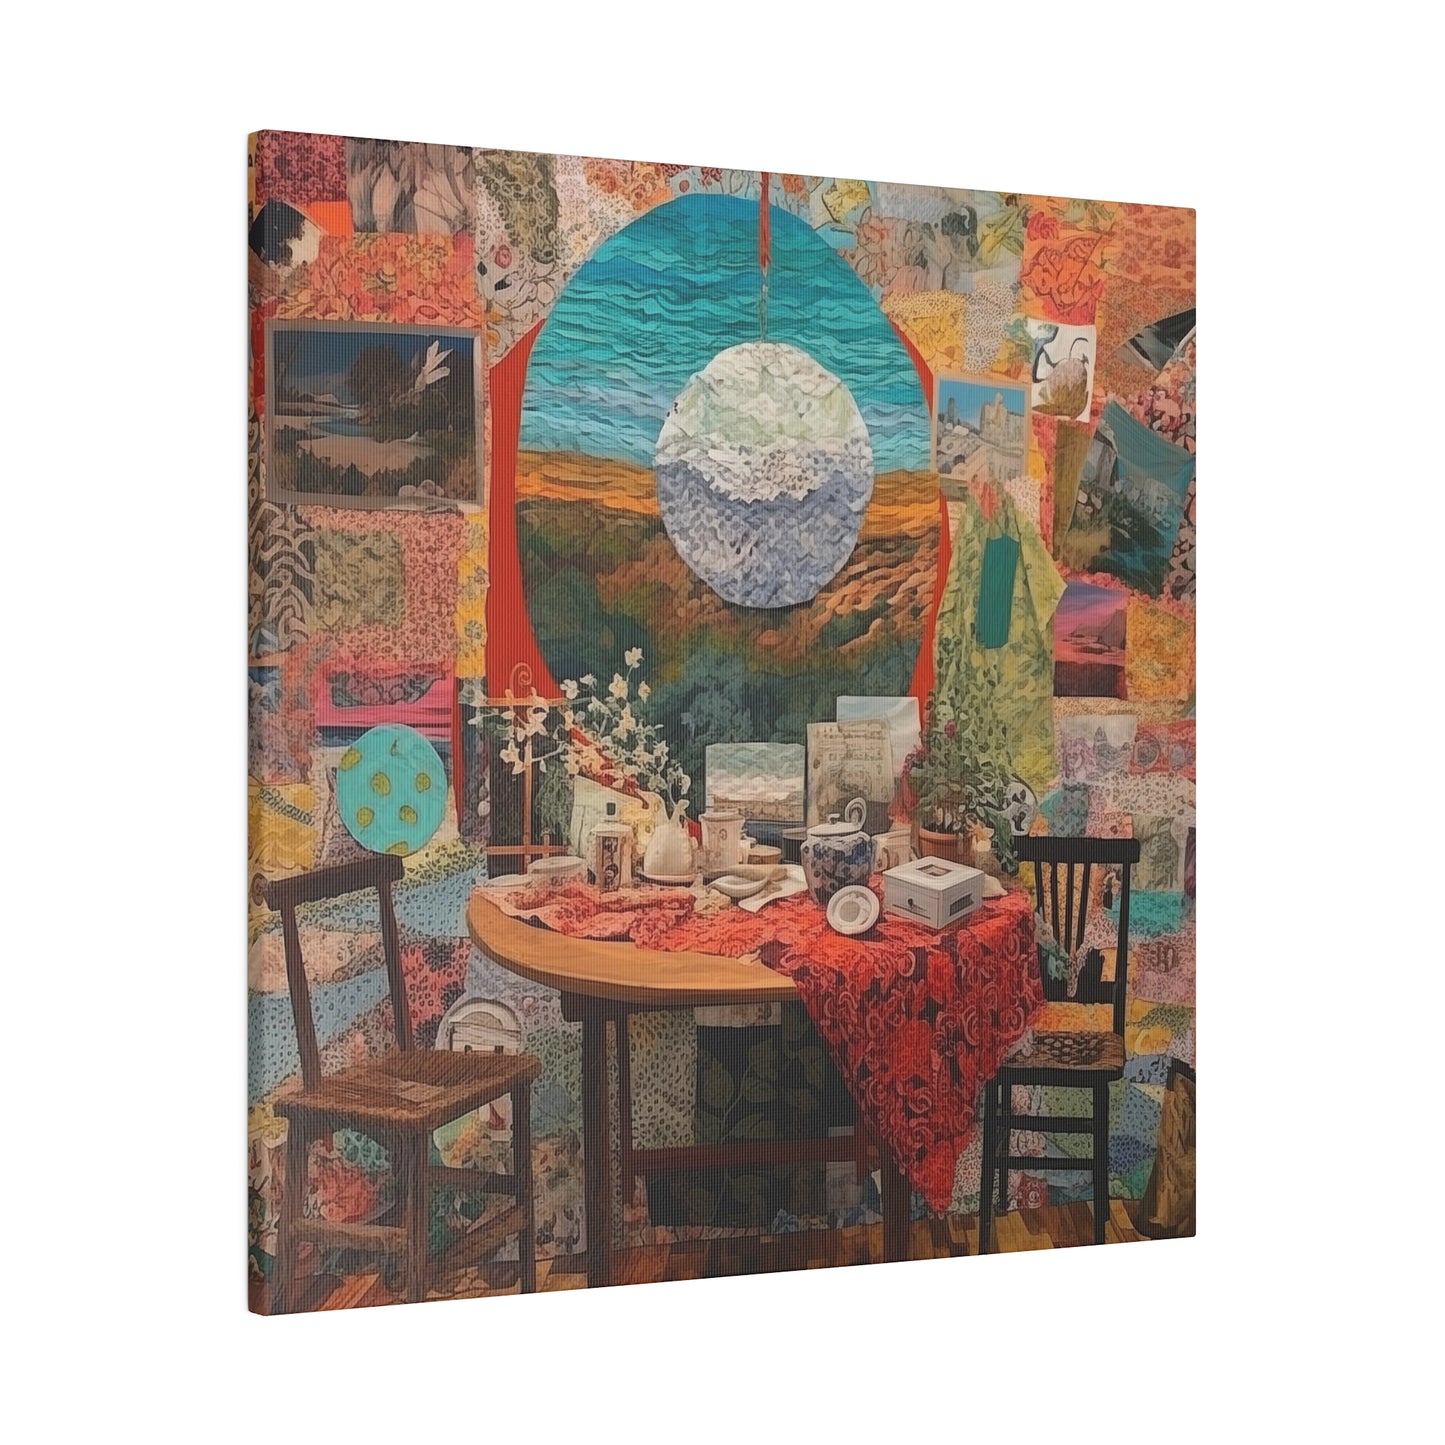 A Symphony of Textures: Mixed Media and Collage Canvas Art